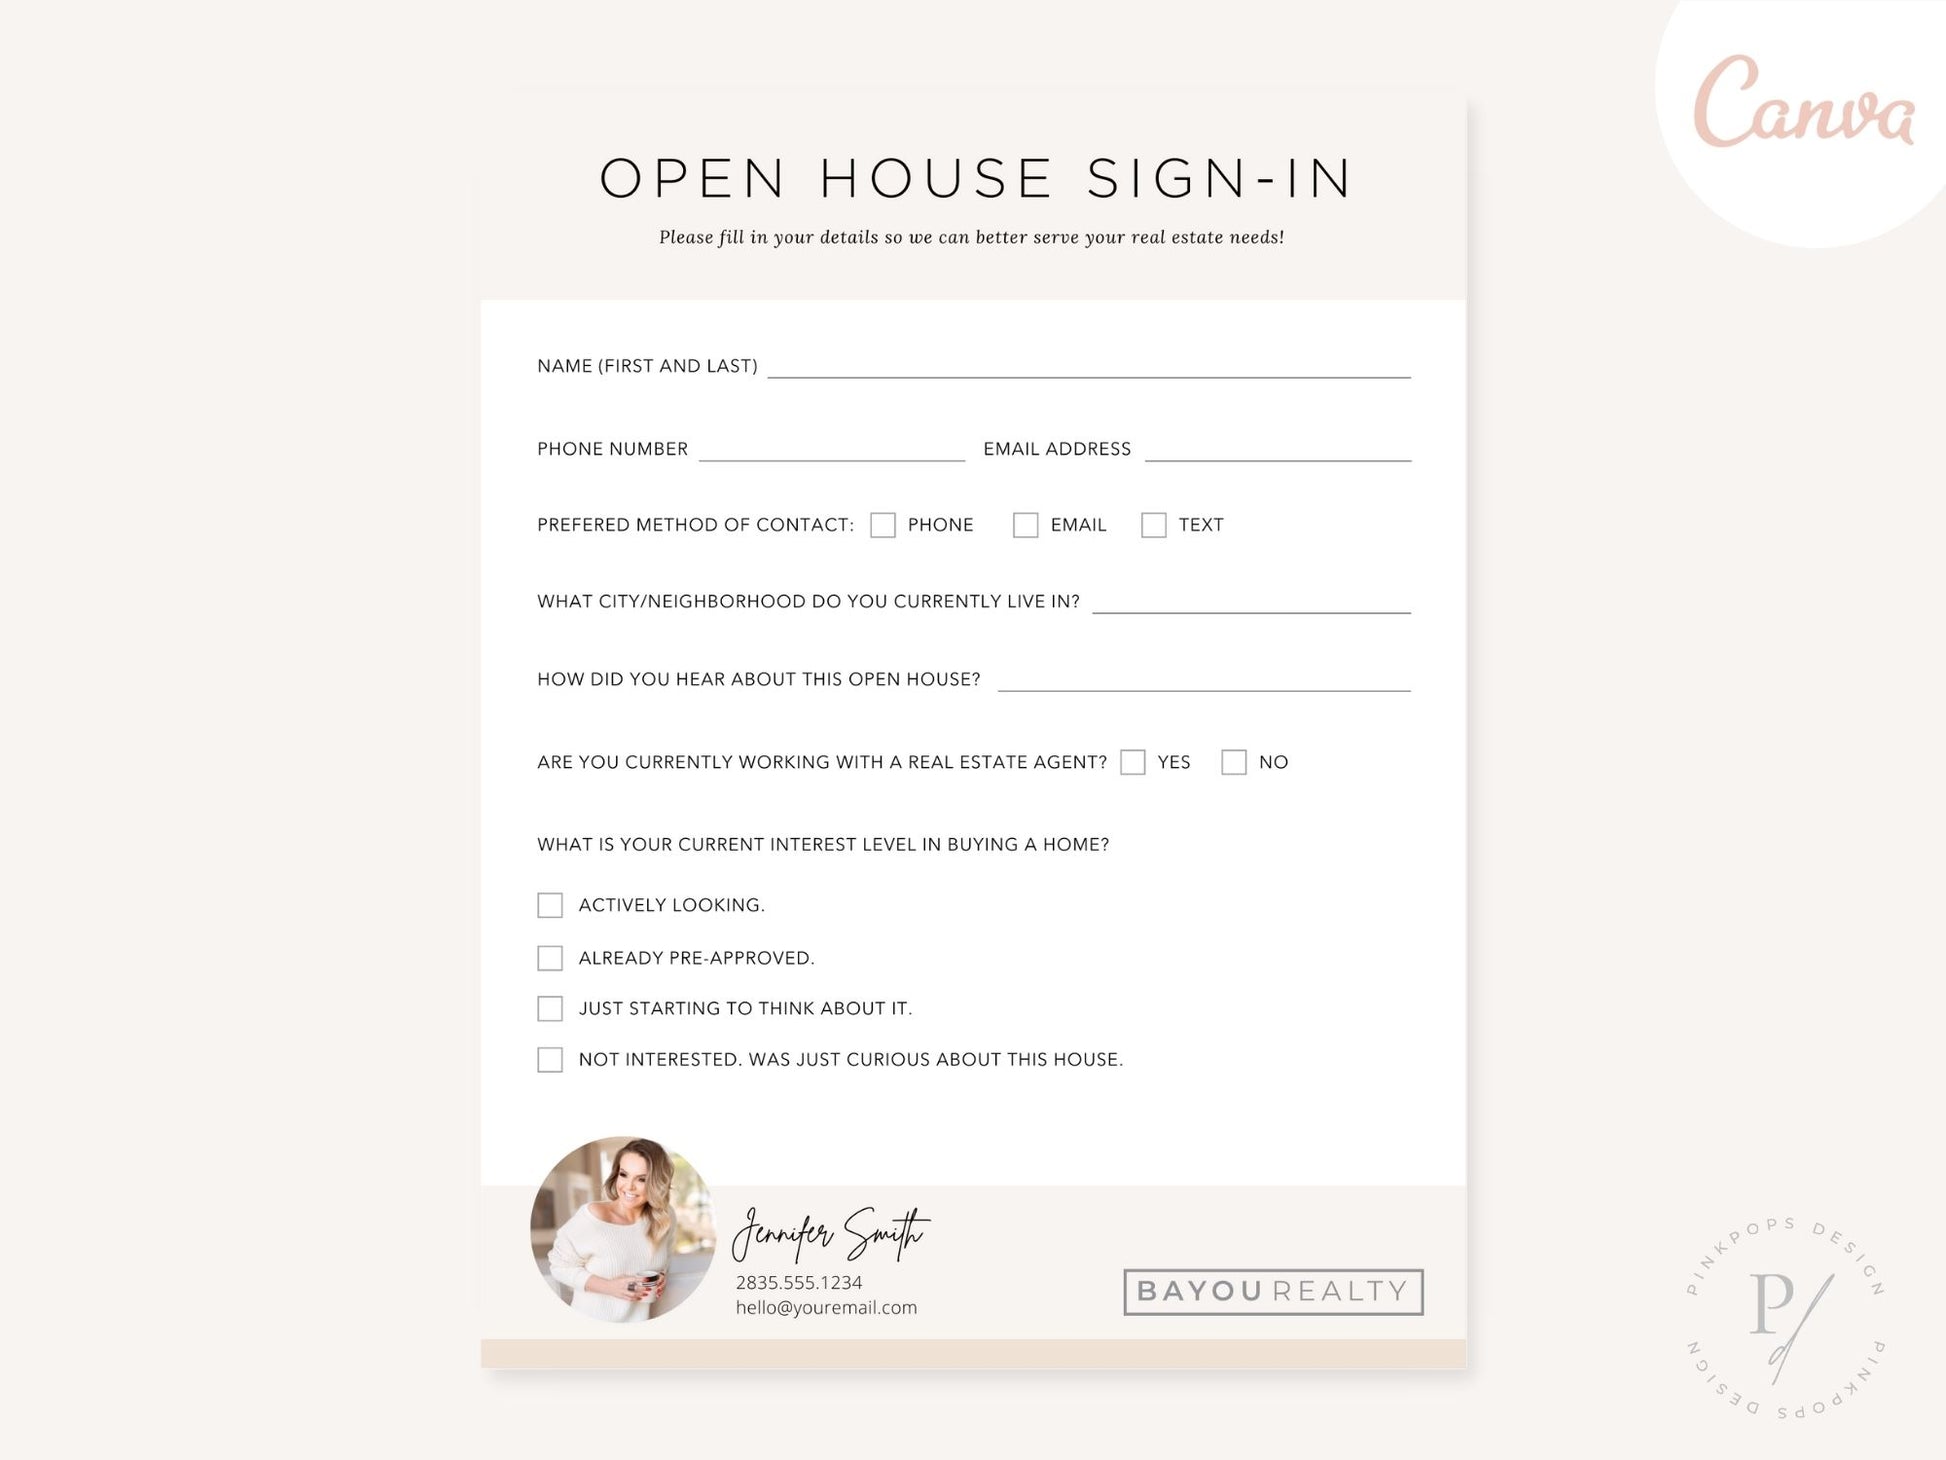 Real Estate Open House Sign-in Sheet - Efficient template for capturing guest information at open house events, fostering connections and enhancing professionalism.